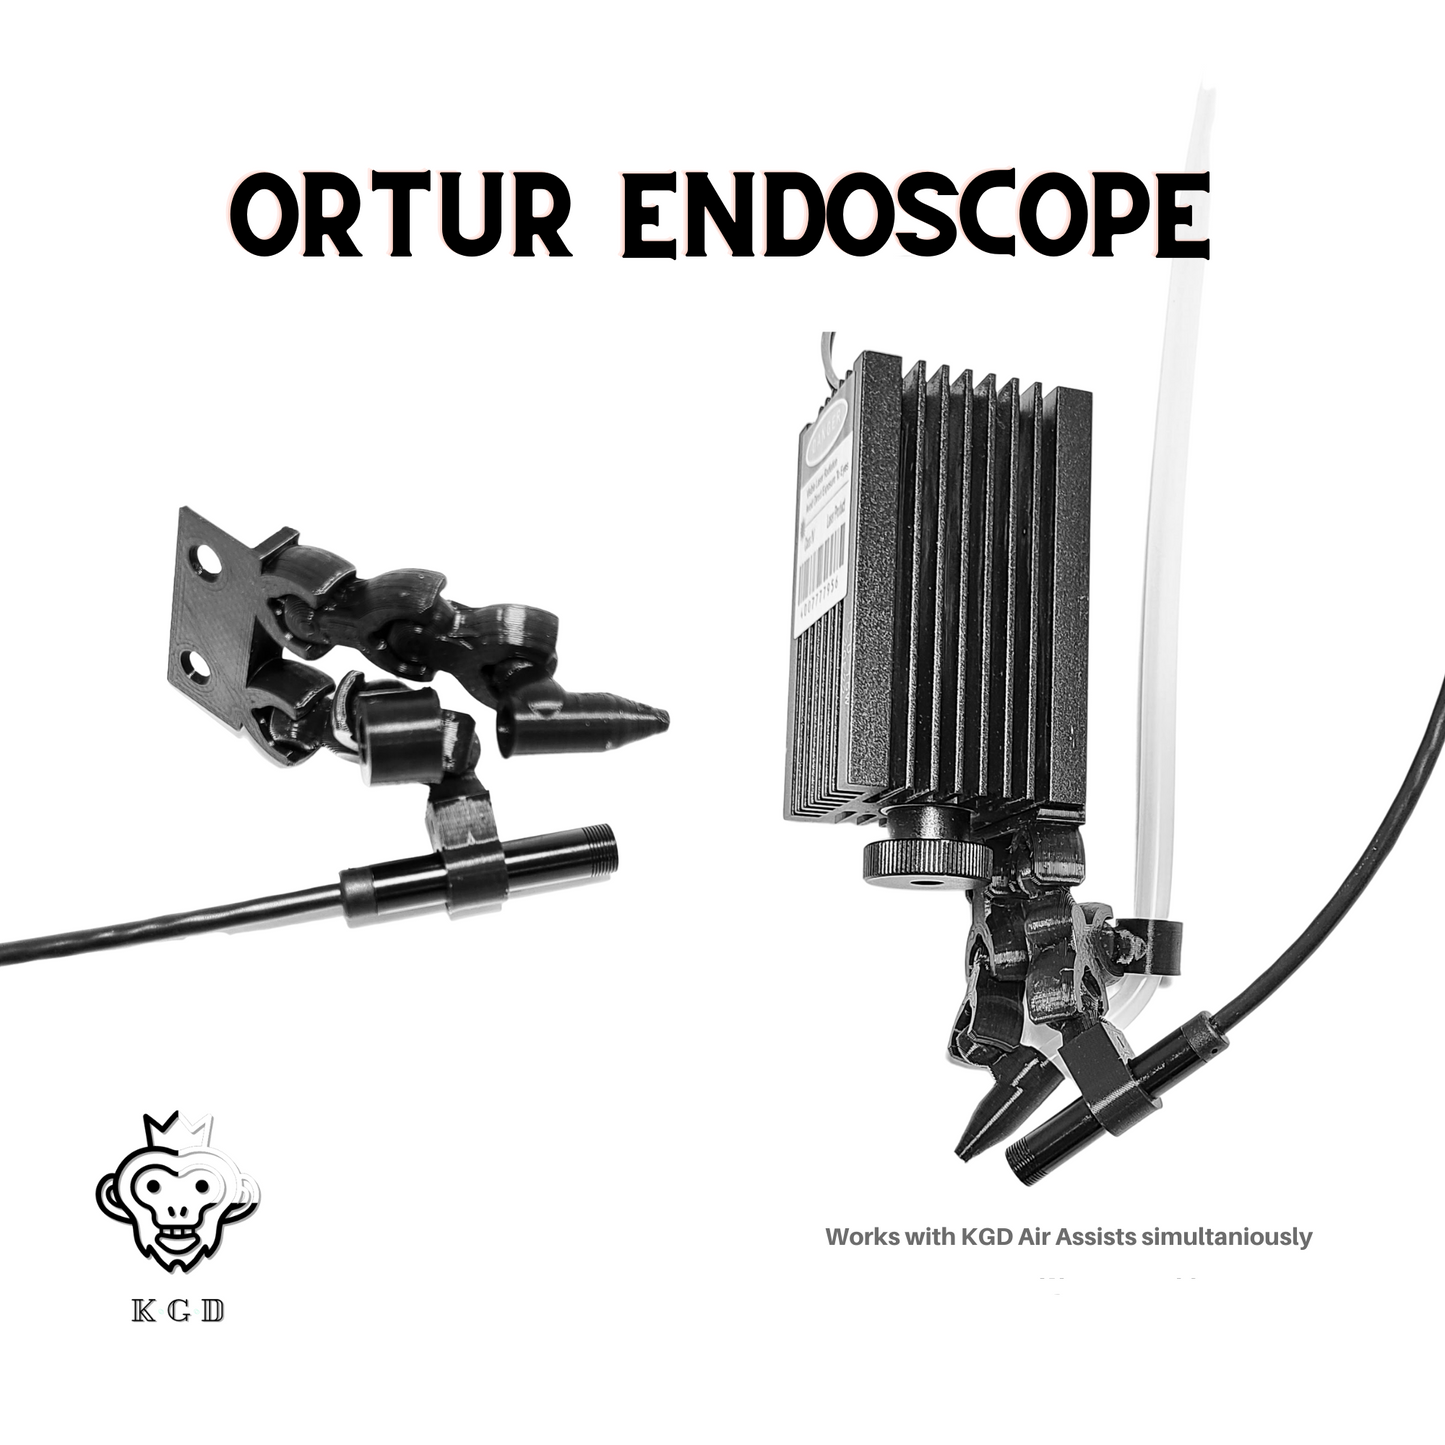 Ortur Laser Master 2 (Standard & Pro Models) Endoscope Attachment | Connects to LightBurn